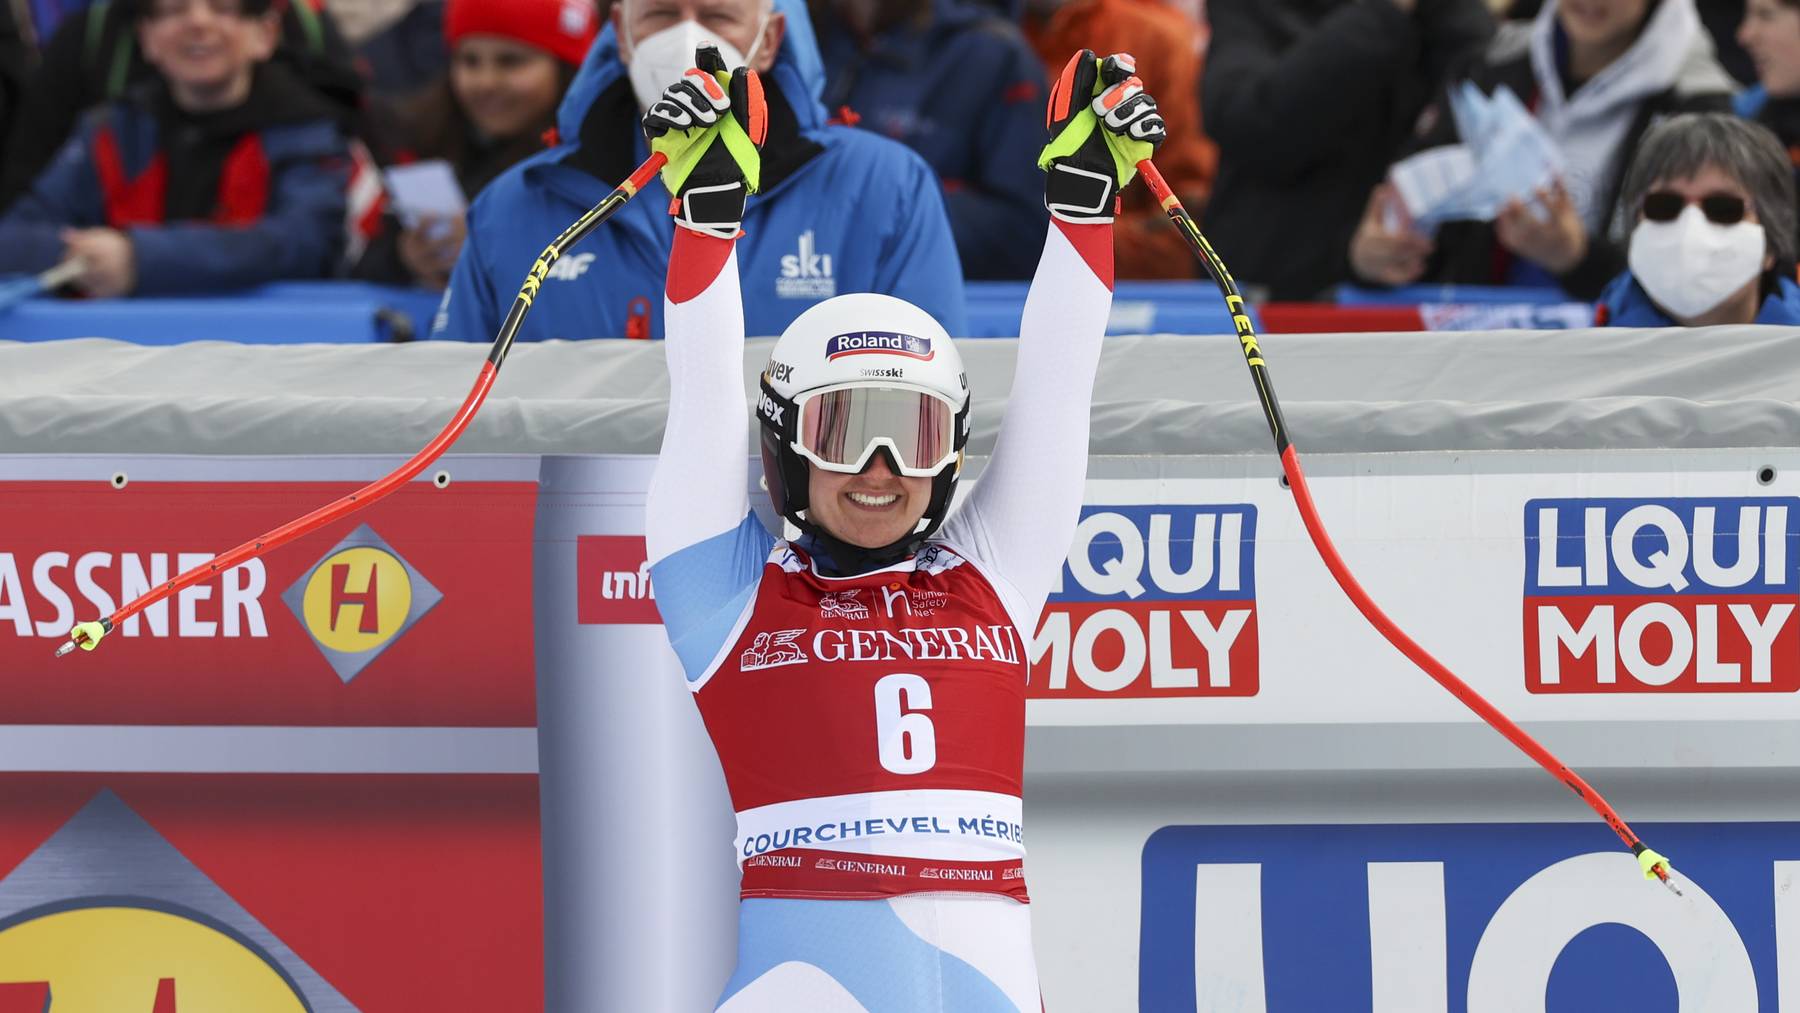 Switzerland's Joana Haehlen reacts in the finish area of an alpine ski, women's World Cup Finals downhill, in Courchevel, France, Wednesday, March 16, 2022. Hählen